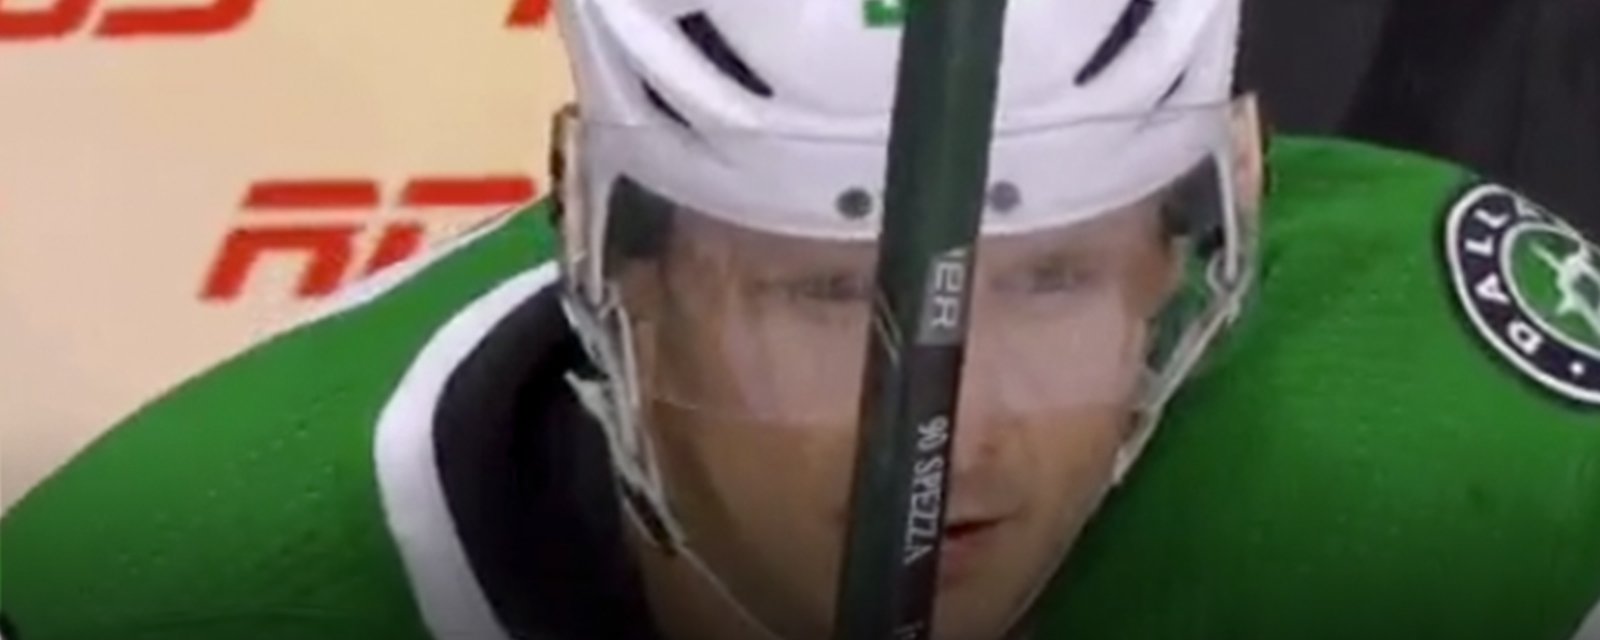 Jason Spezza brought to tears after watching tribute to former teammate Ray Emery